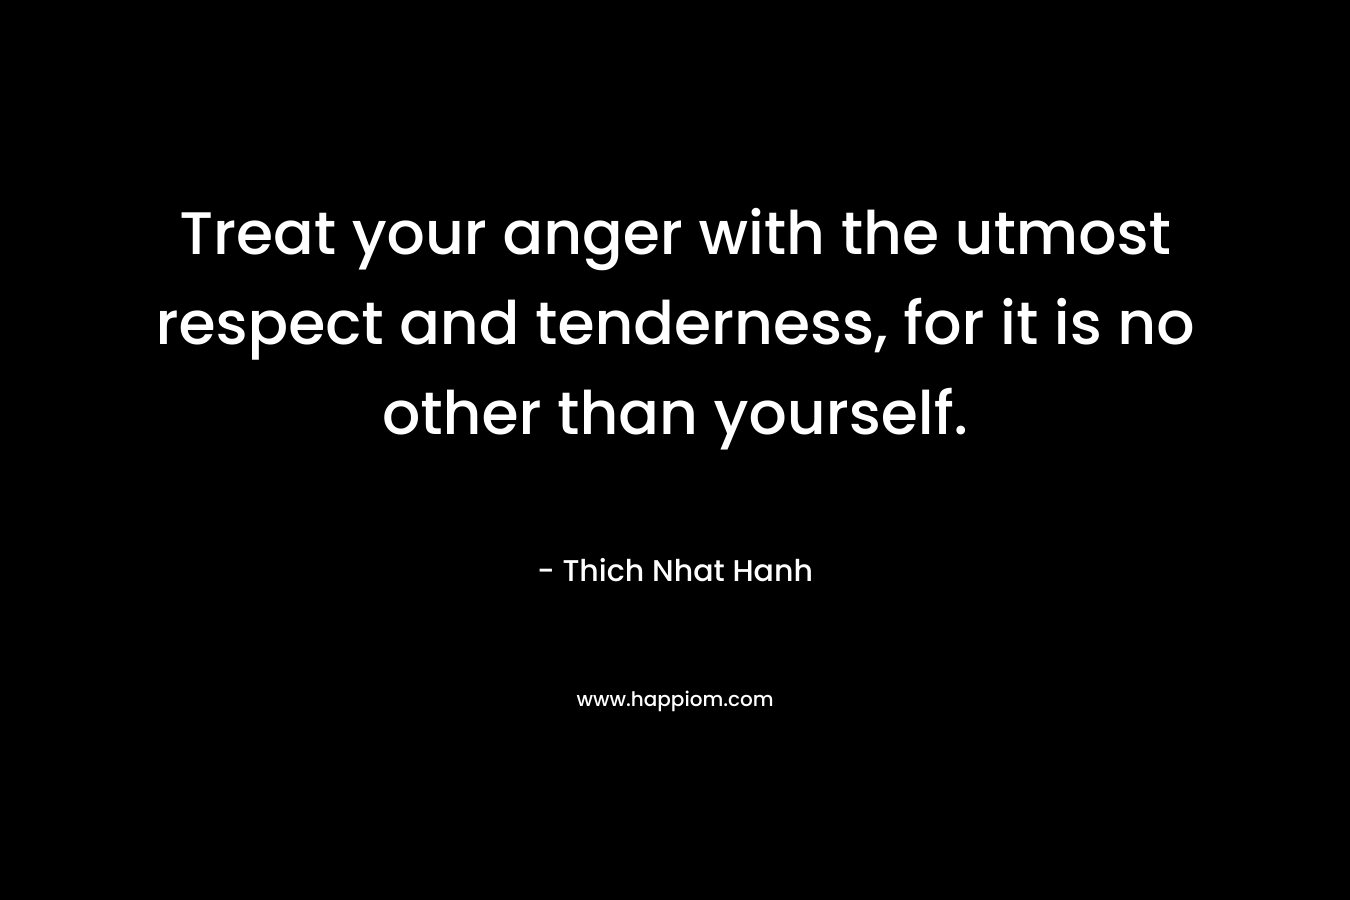 Treat your anger with the utmost respect and tenderness, for it is no other than yourself. – Thich Nhat Hanh